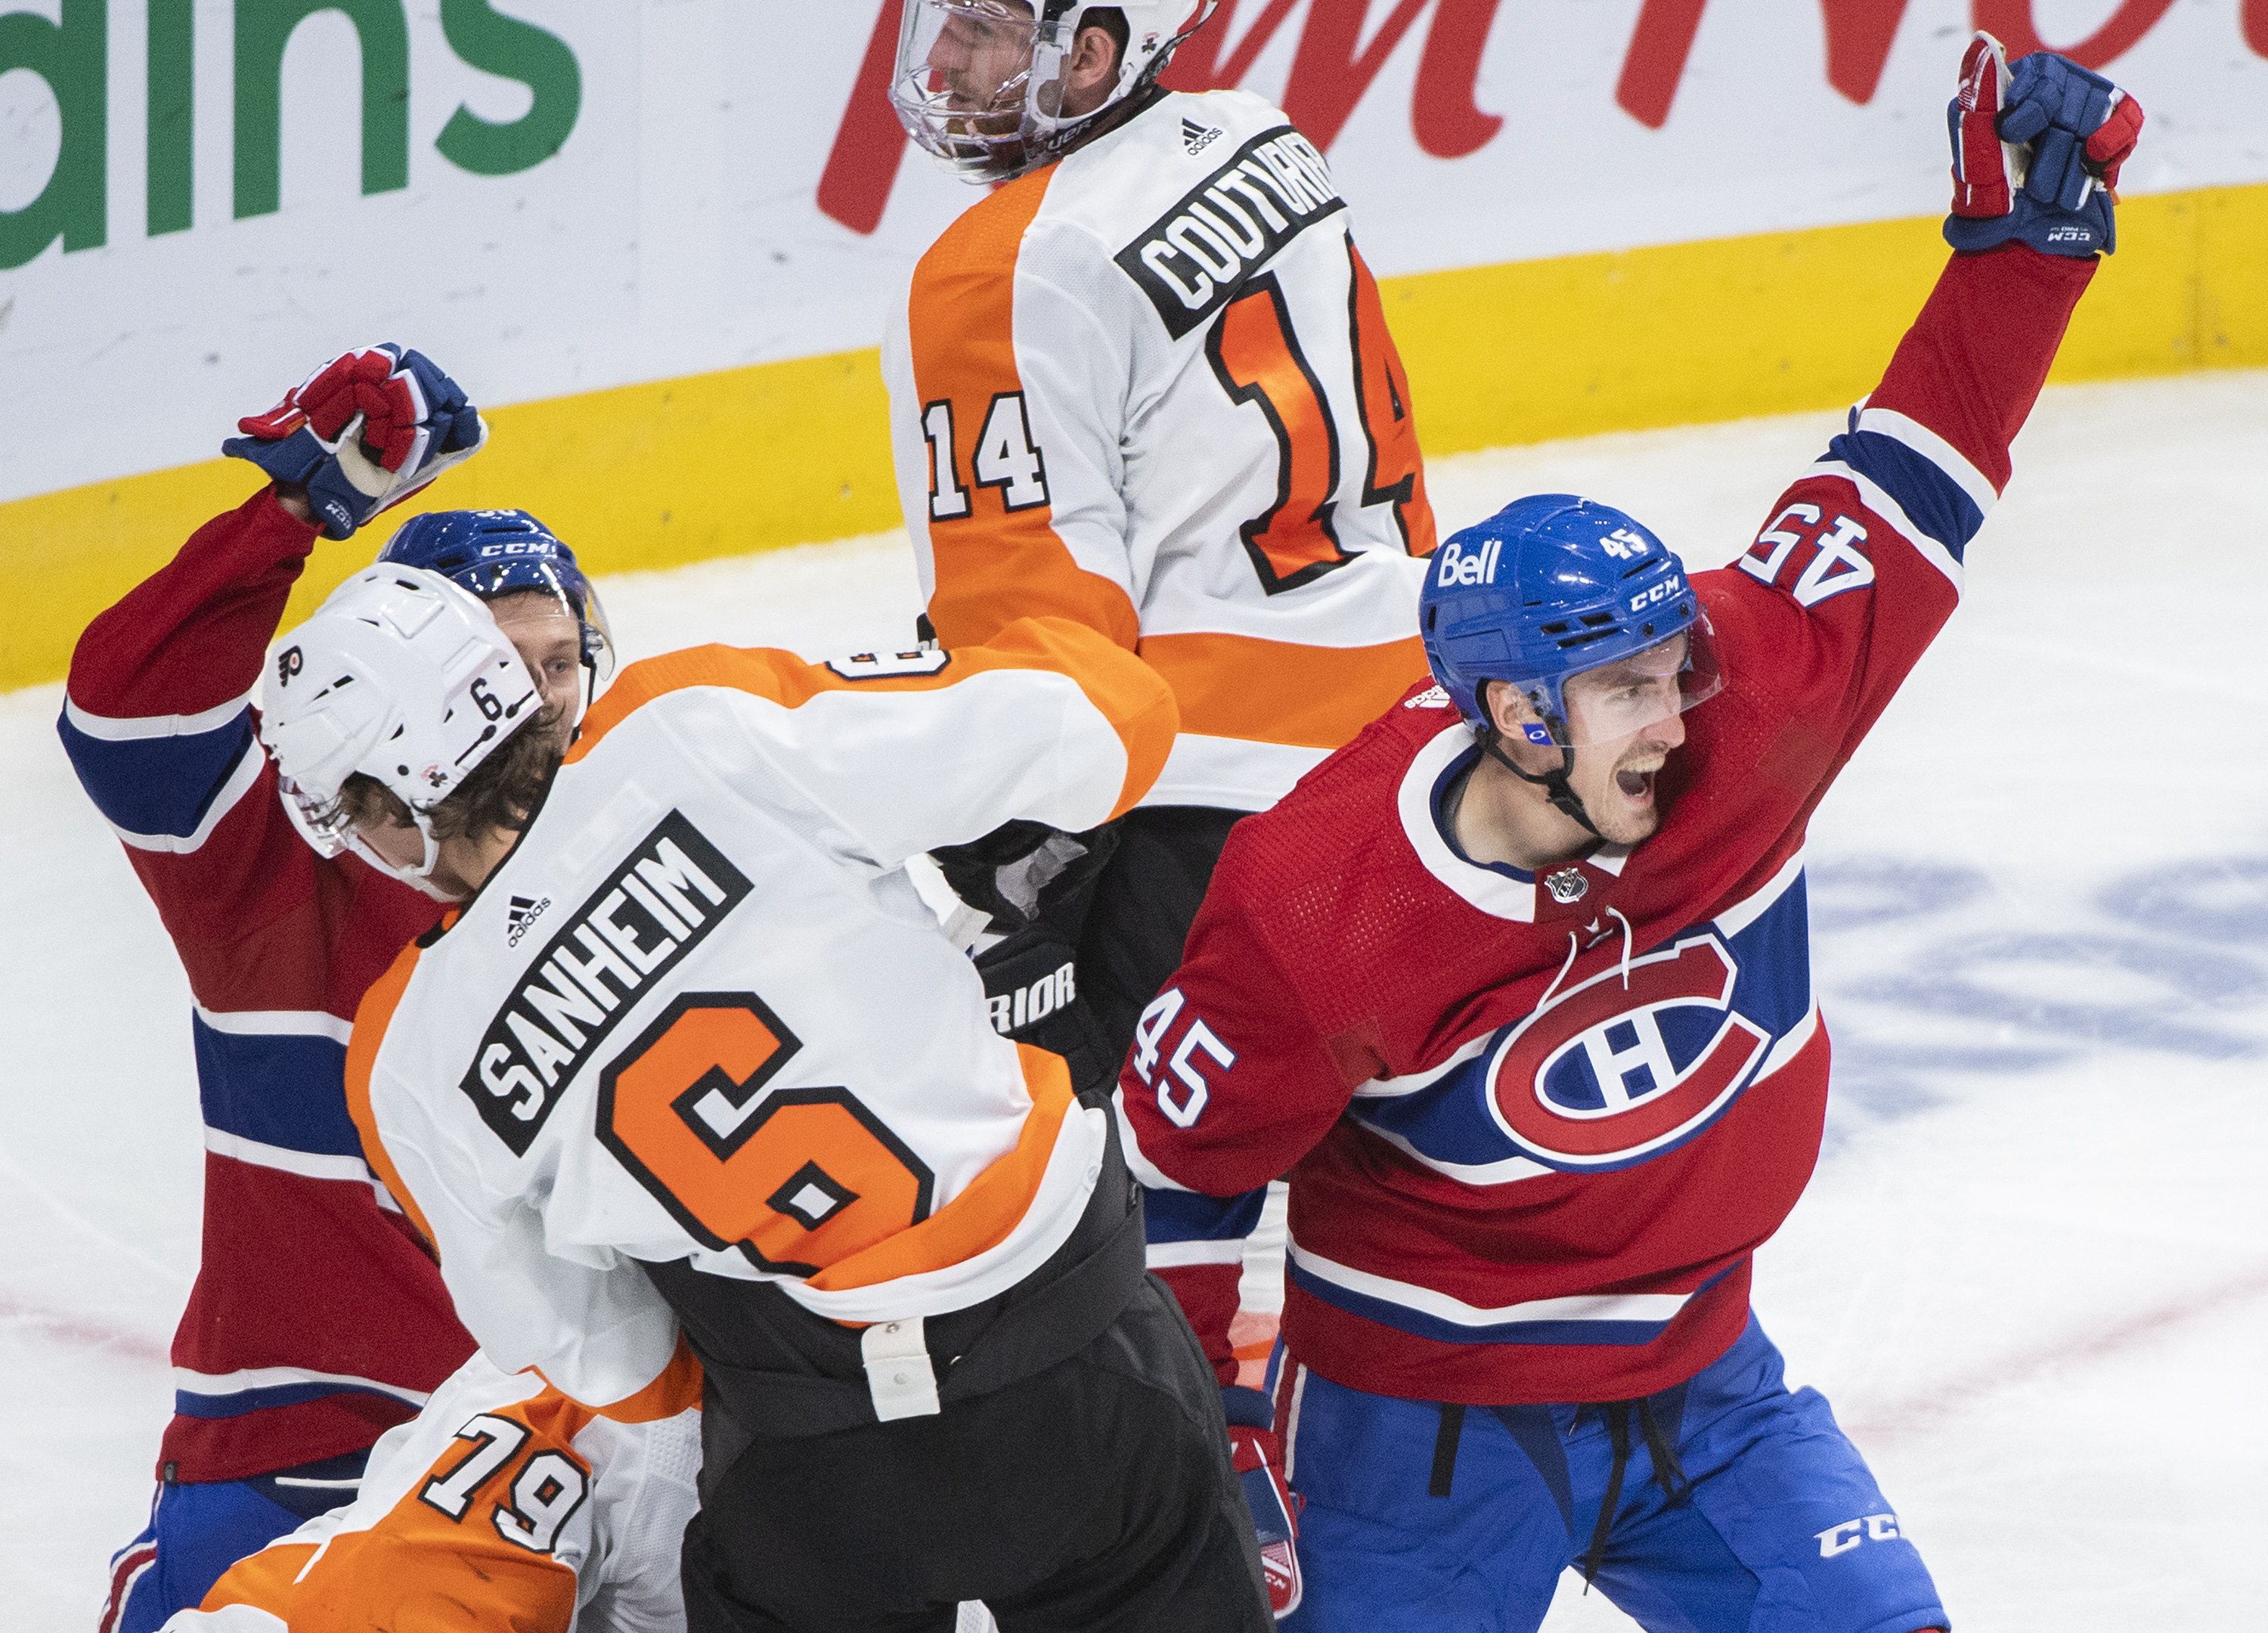 Montreal Canadiens' Laurent Dauphin (45) scores against Philadelphia Flyers goaltender Carter Hart (79) as Flyers' Travis Sanheim (6) defends during third period NHL hockey action in Montreal, Thursday, December 16, 2021. THE CANADIAN PRESS/Graham Hughes